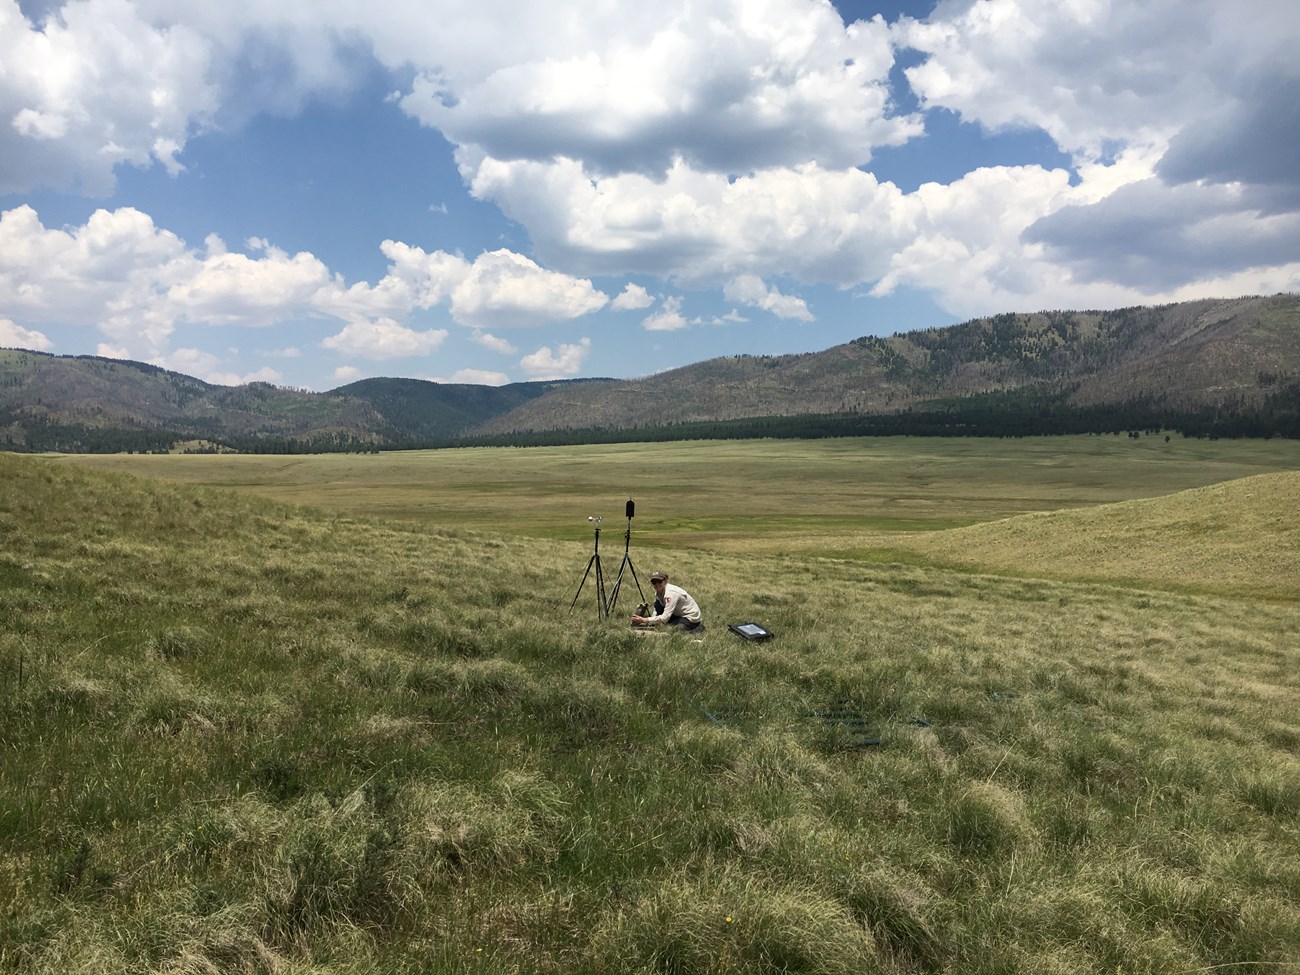 A National Park Service acoustic specialist installs sound recording equipment in the expansive, lush green grasslands of Valles Caldera National Preserve.